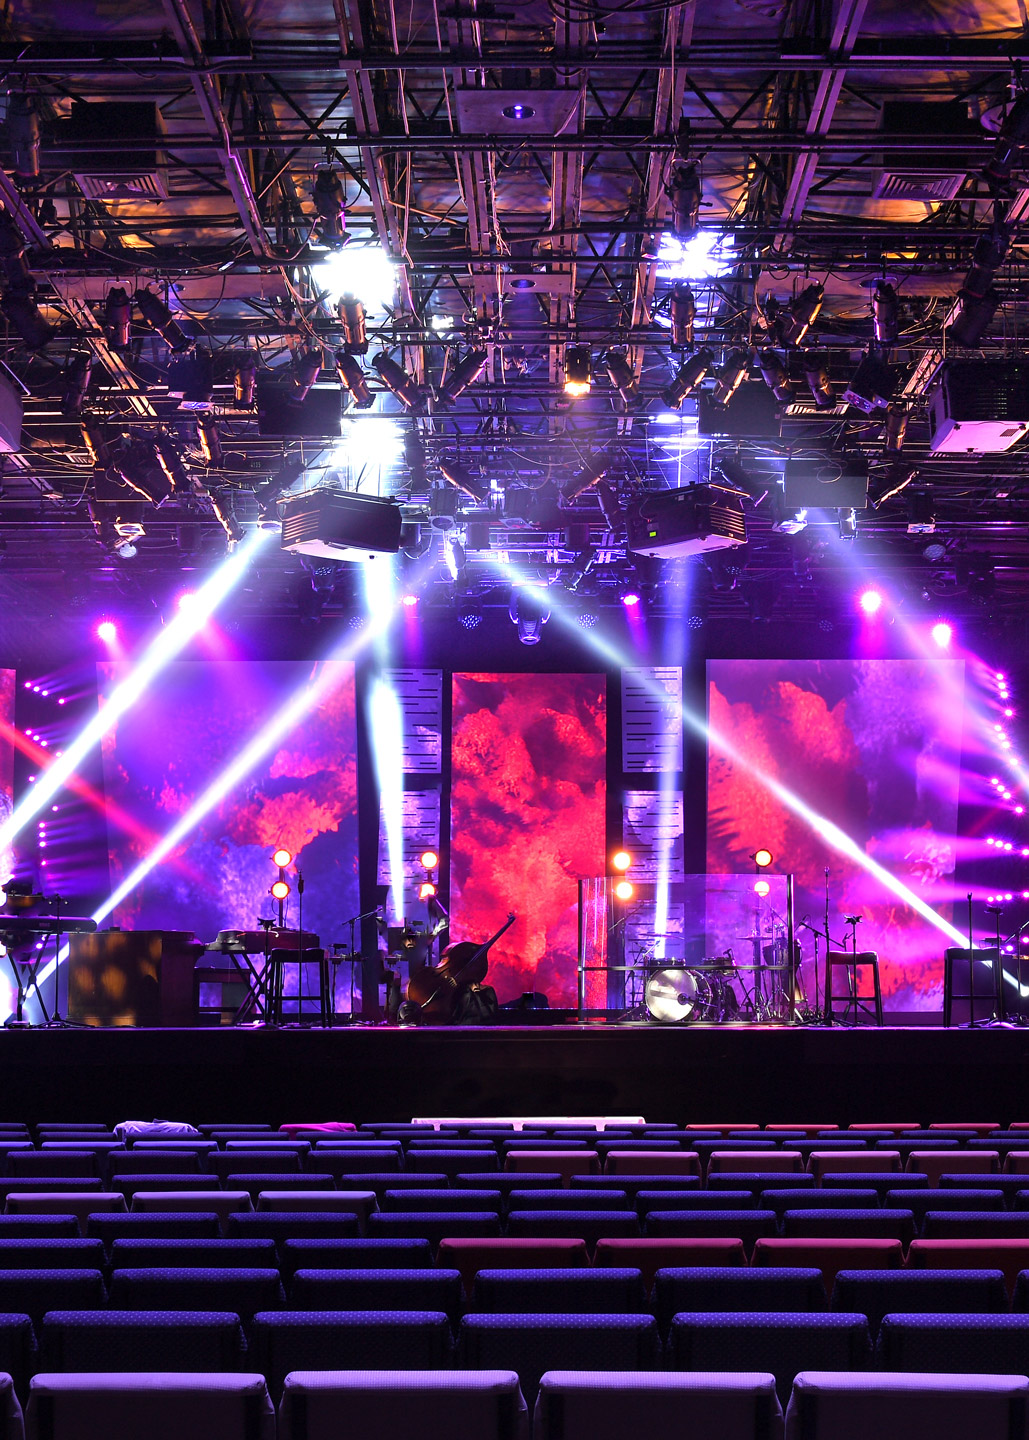 An empty event hall with rows of chairs facing a stage lit with purple lights and screens displaying vibrant, red visuals.